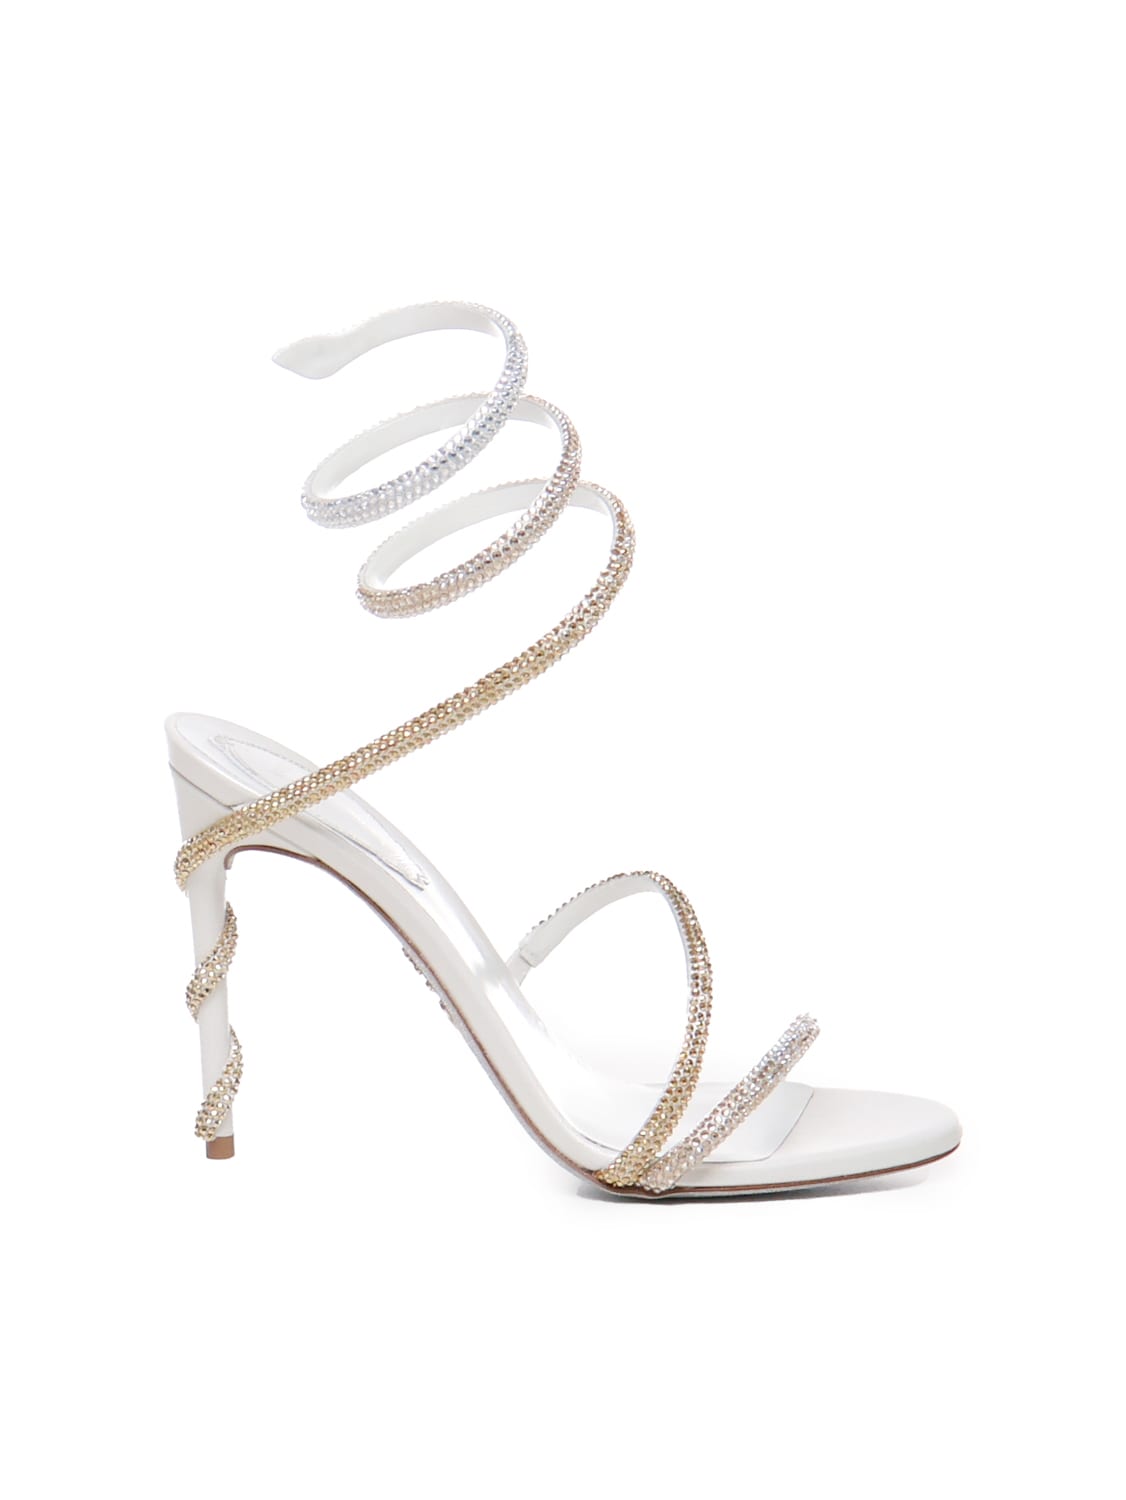 René Caovilla Cleo Sandals In Satin In Ivory, Gold